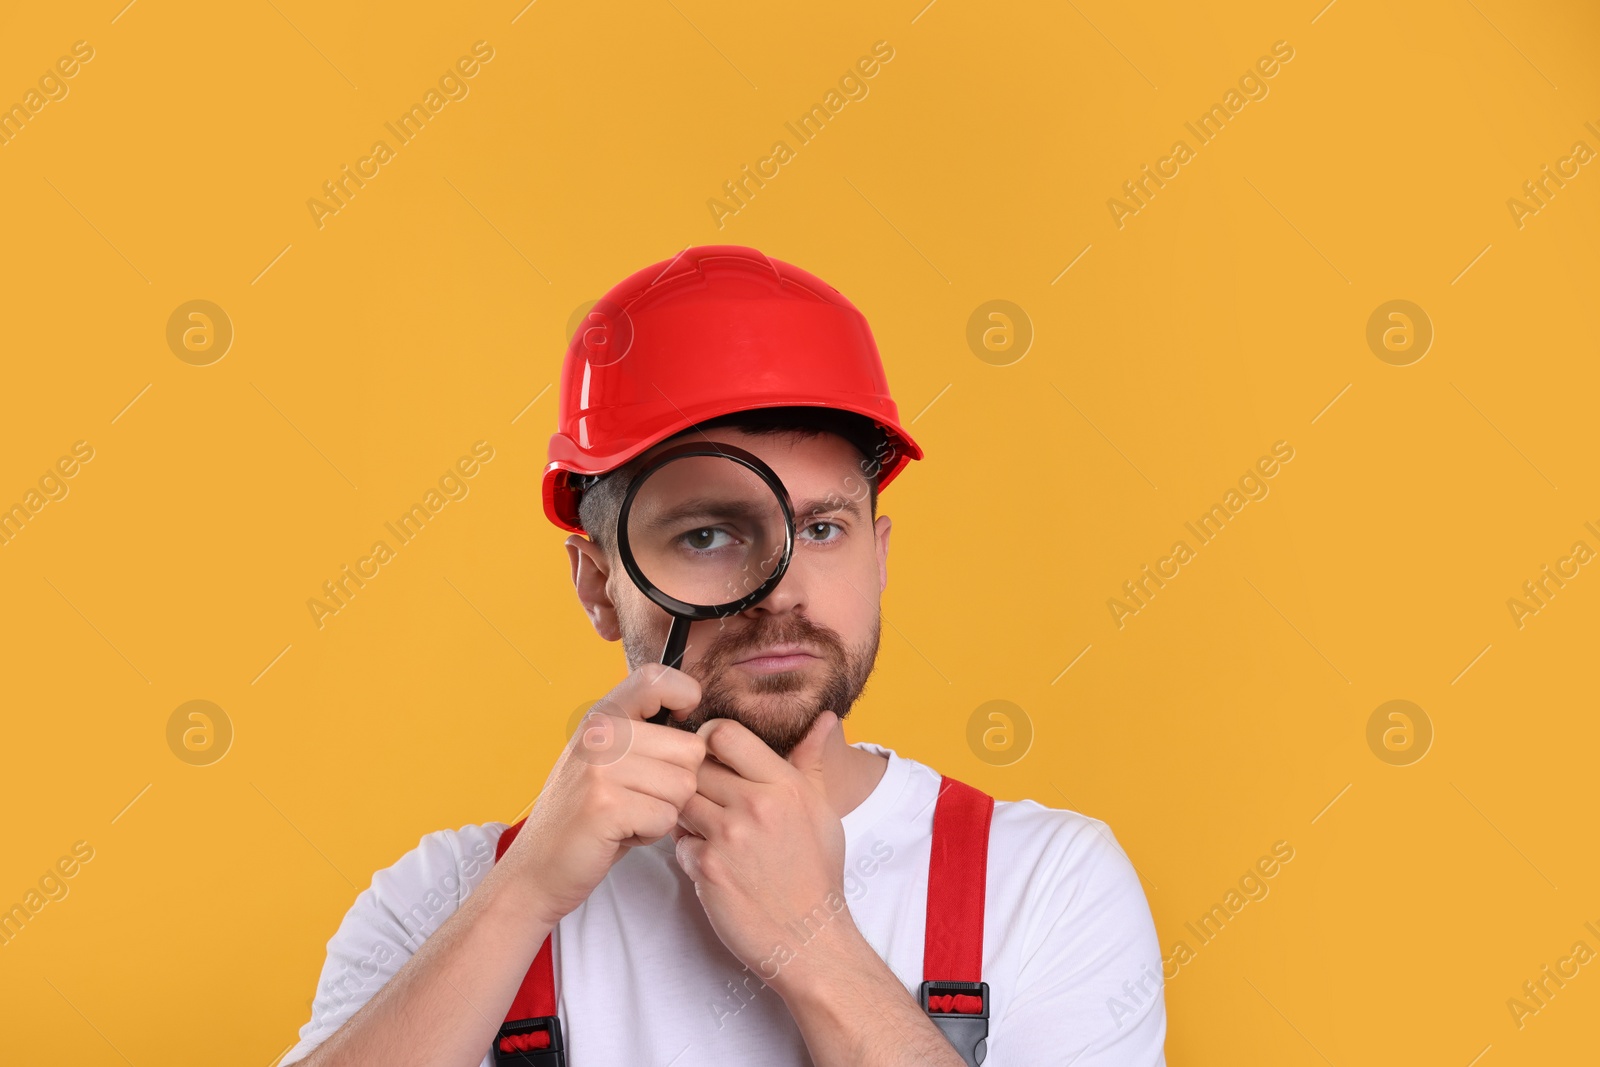 Photo of Confused builder looking through magnifier glass on yellow background